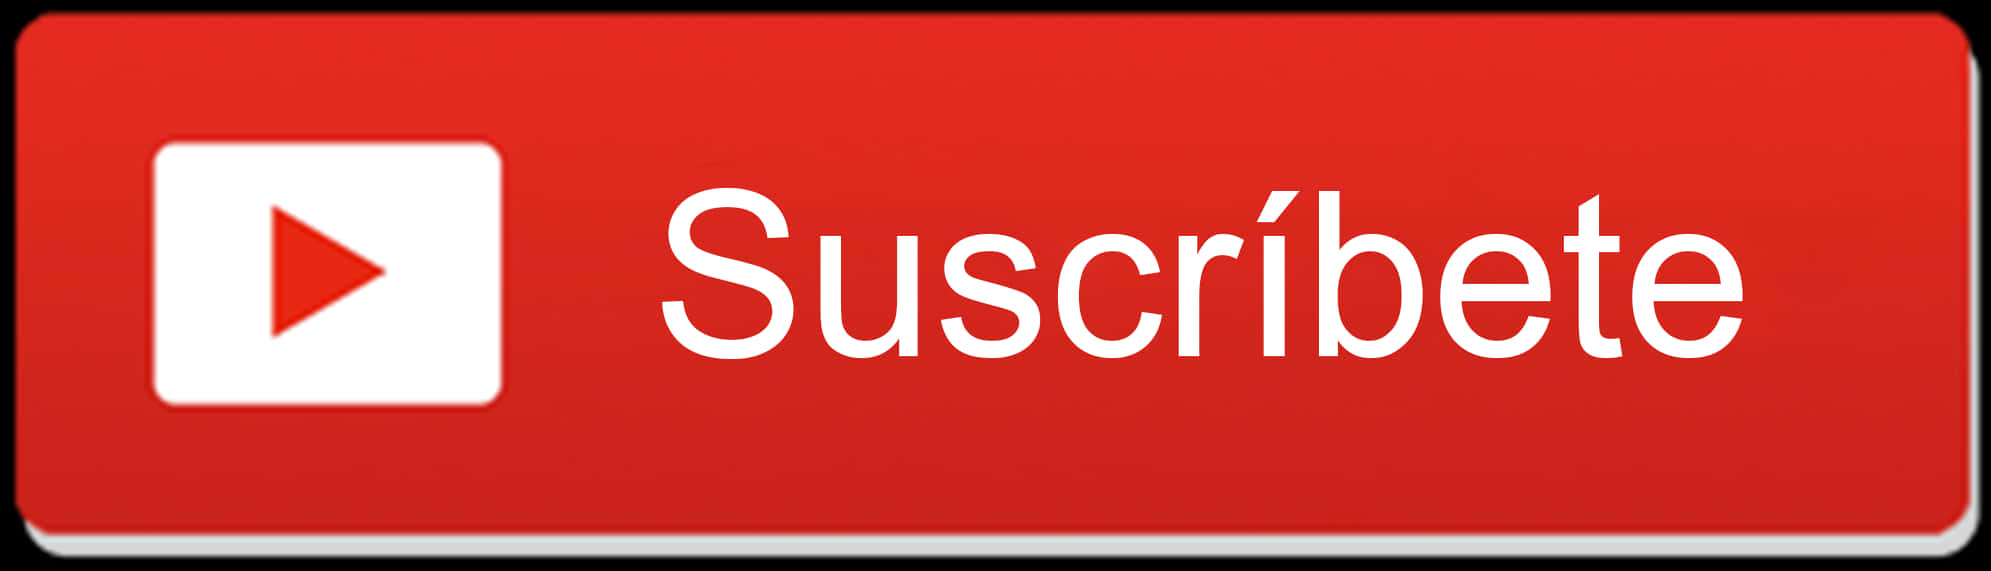 Red You Tube Subscribe Button Spanish